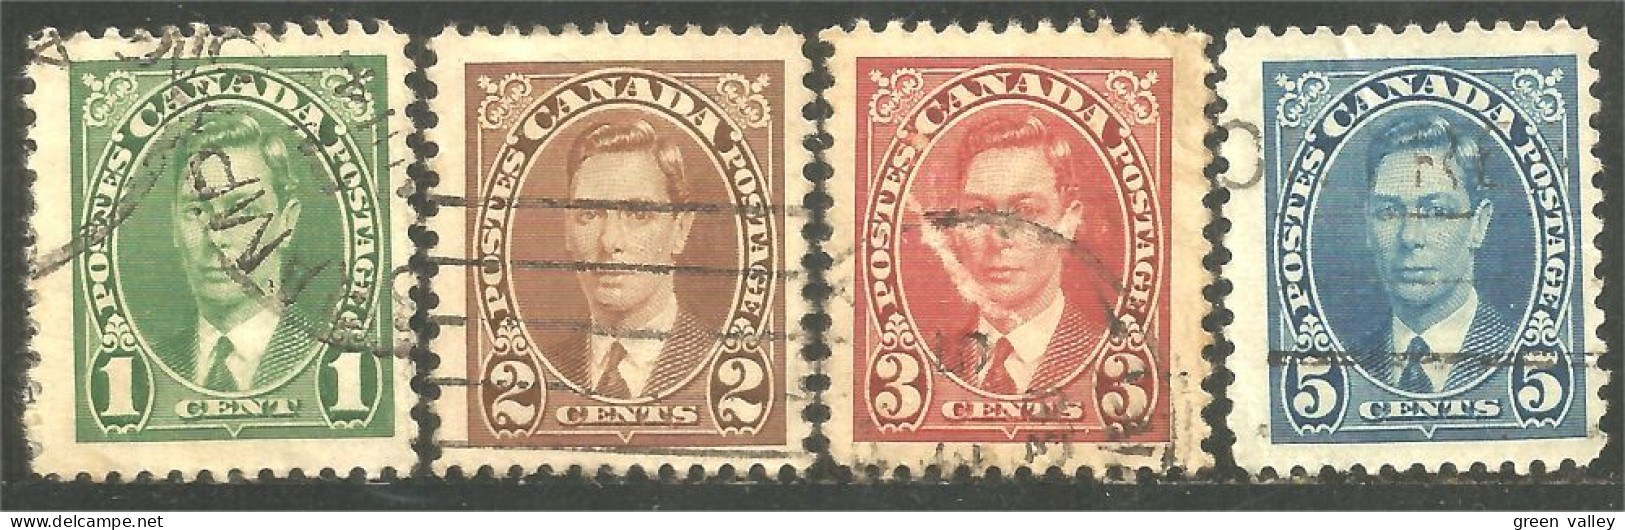 951 Canada 1937 King Roi George VI Mufti Issue 4 Timbres Stamps (484b) - Gebruikt